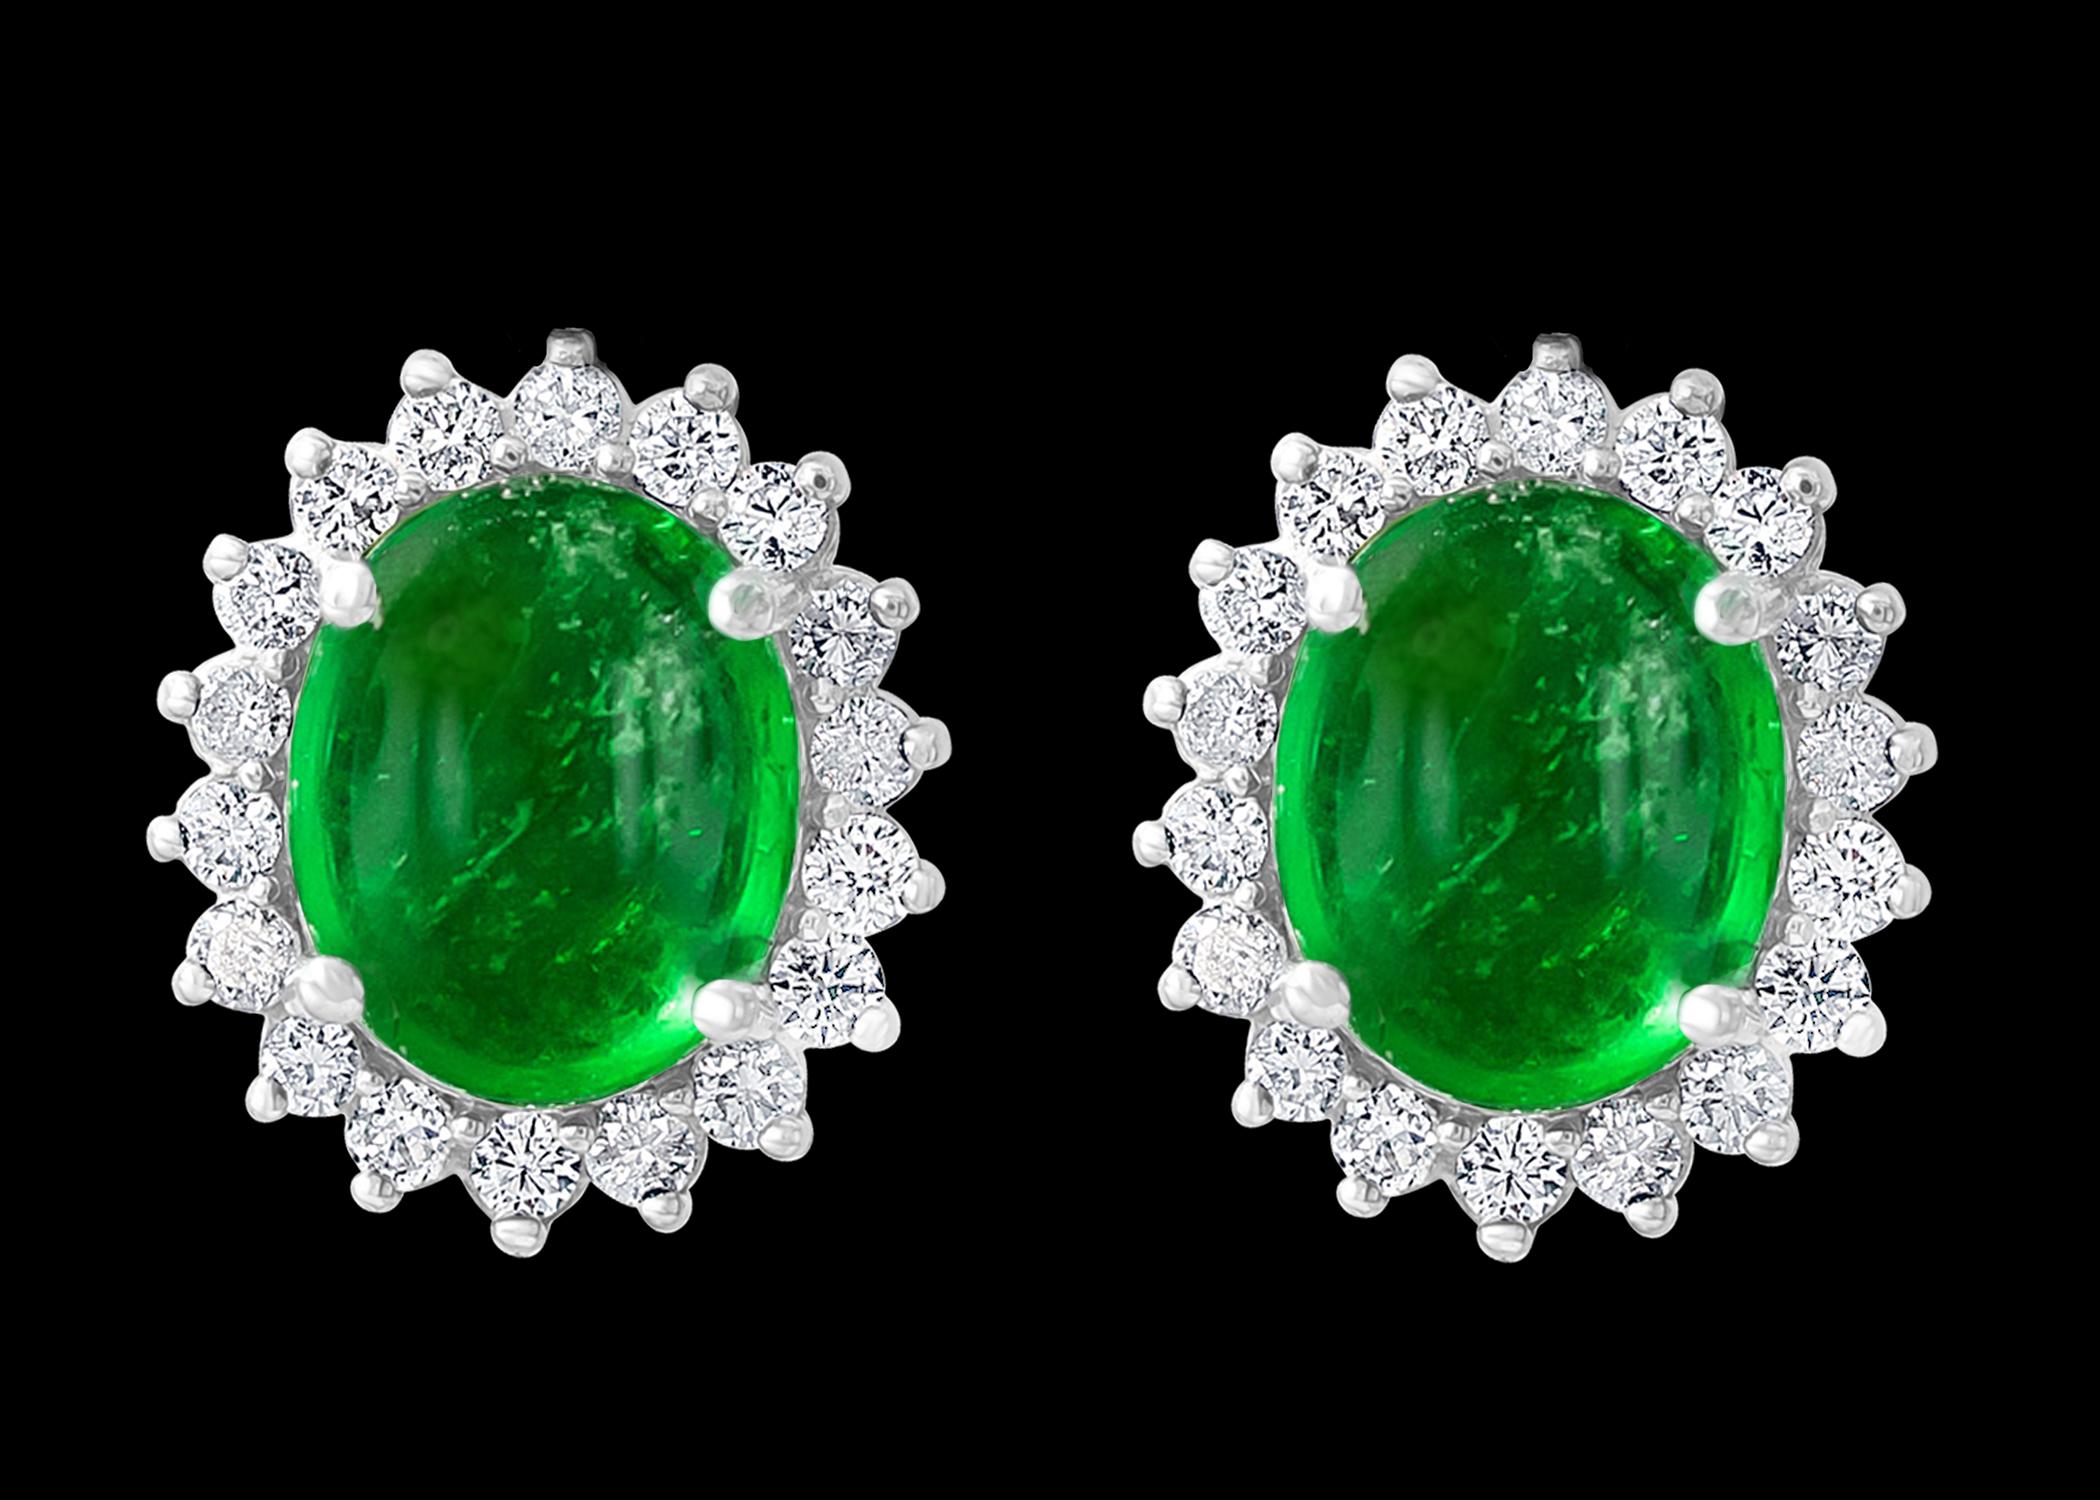 Approximately 12  Carat of Natural Zambian Emerald Cabochon earrings in White gold

Each  Emerald is about 6 carat 
Very desirable color and quality. Extreme fine color and clarity.
perfect matching pair made in 14 Karat White gold
Emerald origin is